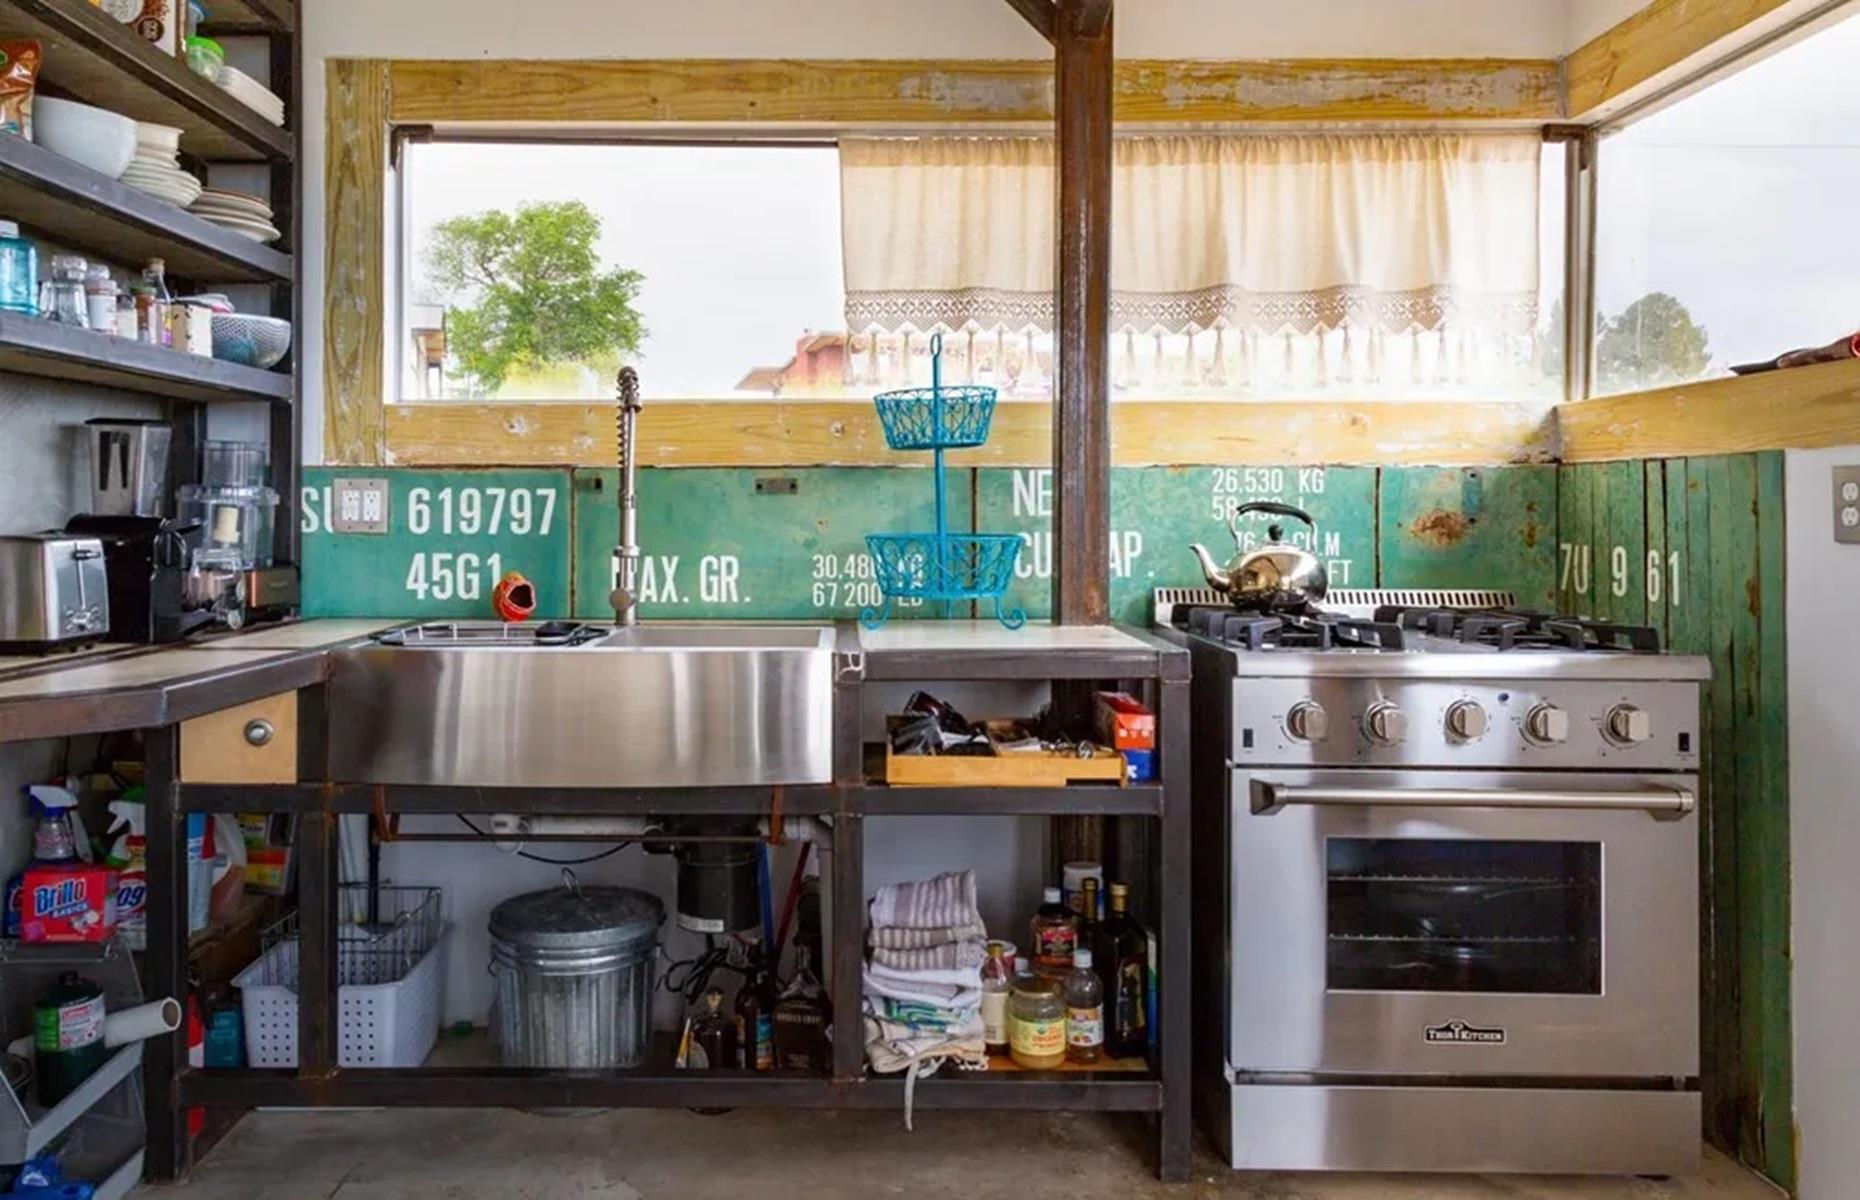 <p>Yet the handmade kitchen is perhaps the home's best asset. Rustic yet perfectly practical, it features a back wall decorated with the shipping container's original labeling. There are open storage shelves and wooden countertops. If you're in love, the property is for sale right now, via <a href="https://www.marfavistarealty.com/detail-1100-n-hermosa-street">Marfa Vista Real Estate</a>, for $525,000.</p>